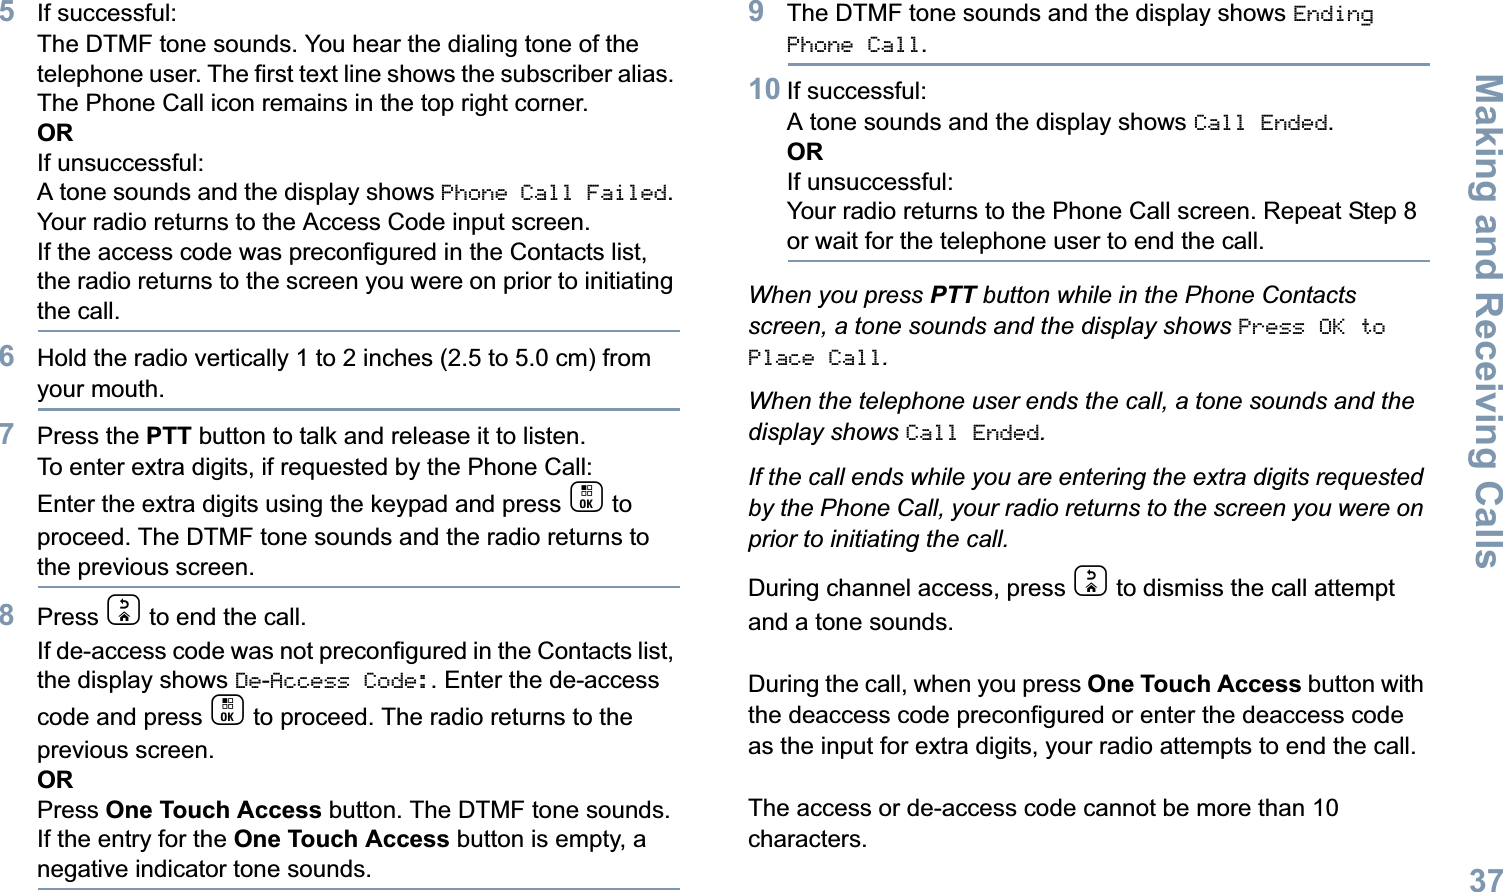 Making and Receiving CallsEnglish375If successful:The DTMF tone sounds. You hear the dialing tone of the telephone user. The first text line shows the subscriber alias. The Phone Call icon remains in the top right corner. ORIf unsuccessful:A tone sounds and the display shows Phone Call Failed. Your radio returns to the Access Code input screen.If the access code was preconfigured in the Contacts list, the radio returns to the screen you were on prior to initiating the call.6Hold the radio vertically 1 to 2 inches (2.5 to 5.0 cm) from your mouth.7Press the PTT button to talk and release it to listen. To enter extra digits, if requested by the Phone Call:Enter the extra digits using the keypad and press c to proceed. The DTMF tone sounds and the radio returns to the previous screen.8Press d to end the call.If de-access code was not preconfigured in the Contacts list, the display shows De-Access Code:. Enter the de-access code and press c to proceed. The radio returns to the previous screen.ORPress One Touch Access button. The DTMF tone sounds. If the entry for the One Touch Access button is empty, a negative indicator tone sounds.9The DTMF tone sounds and the display shows Ending Phone Call.10 If successful:A tone sounds and the display shows Call Ended. ORIf unsuccessful:Your radio returns to the Phone Call screen. Repeat Step 8 or wait for the telephone user to end the call.When you press PTT button while in the Phone Contacts screen, a tone sounds and the display shows Press OK to Place Call.When the telephone user ends the call, a tone sounds and the display shows Call Ended.If the call ends while you are entering the extra digits requested by the Phone Call, your radio returns to the screen you were on prior to initiating the call.During channel access, press d to dismiss the call attempt and a tone sounds.During the call, when you press One Touch Access button with the deaccess code preconfigured or enter the deaccess code as the input for extra digits, your radio attempts to end the call.The access or de-access code cannot be more than 10 characters.